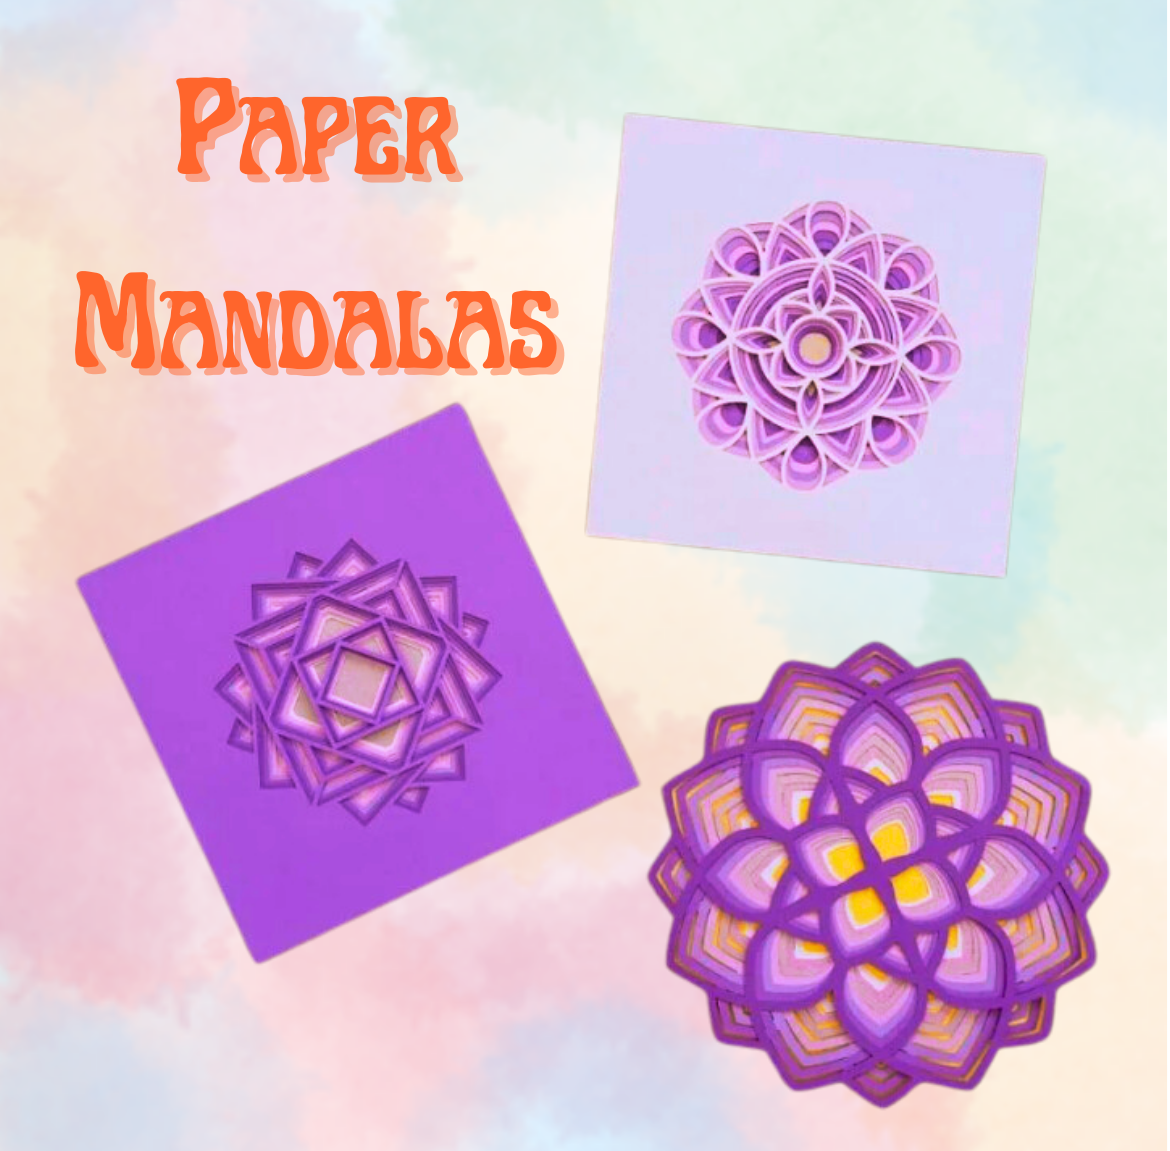 Orange text says paper mandalas. 3 3D paper mandalas of different designs in violet and yellow paper on a multi color light pastel background